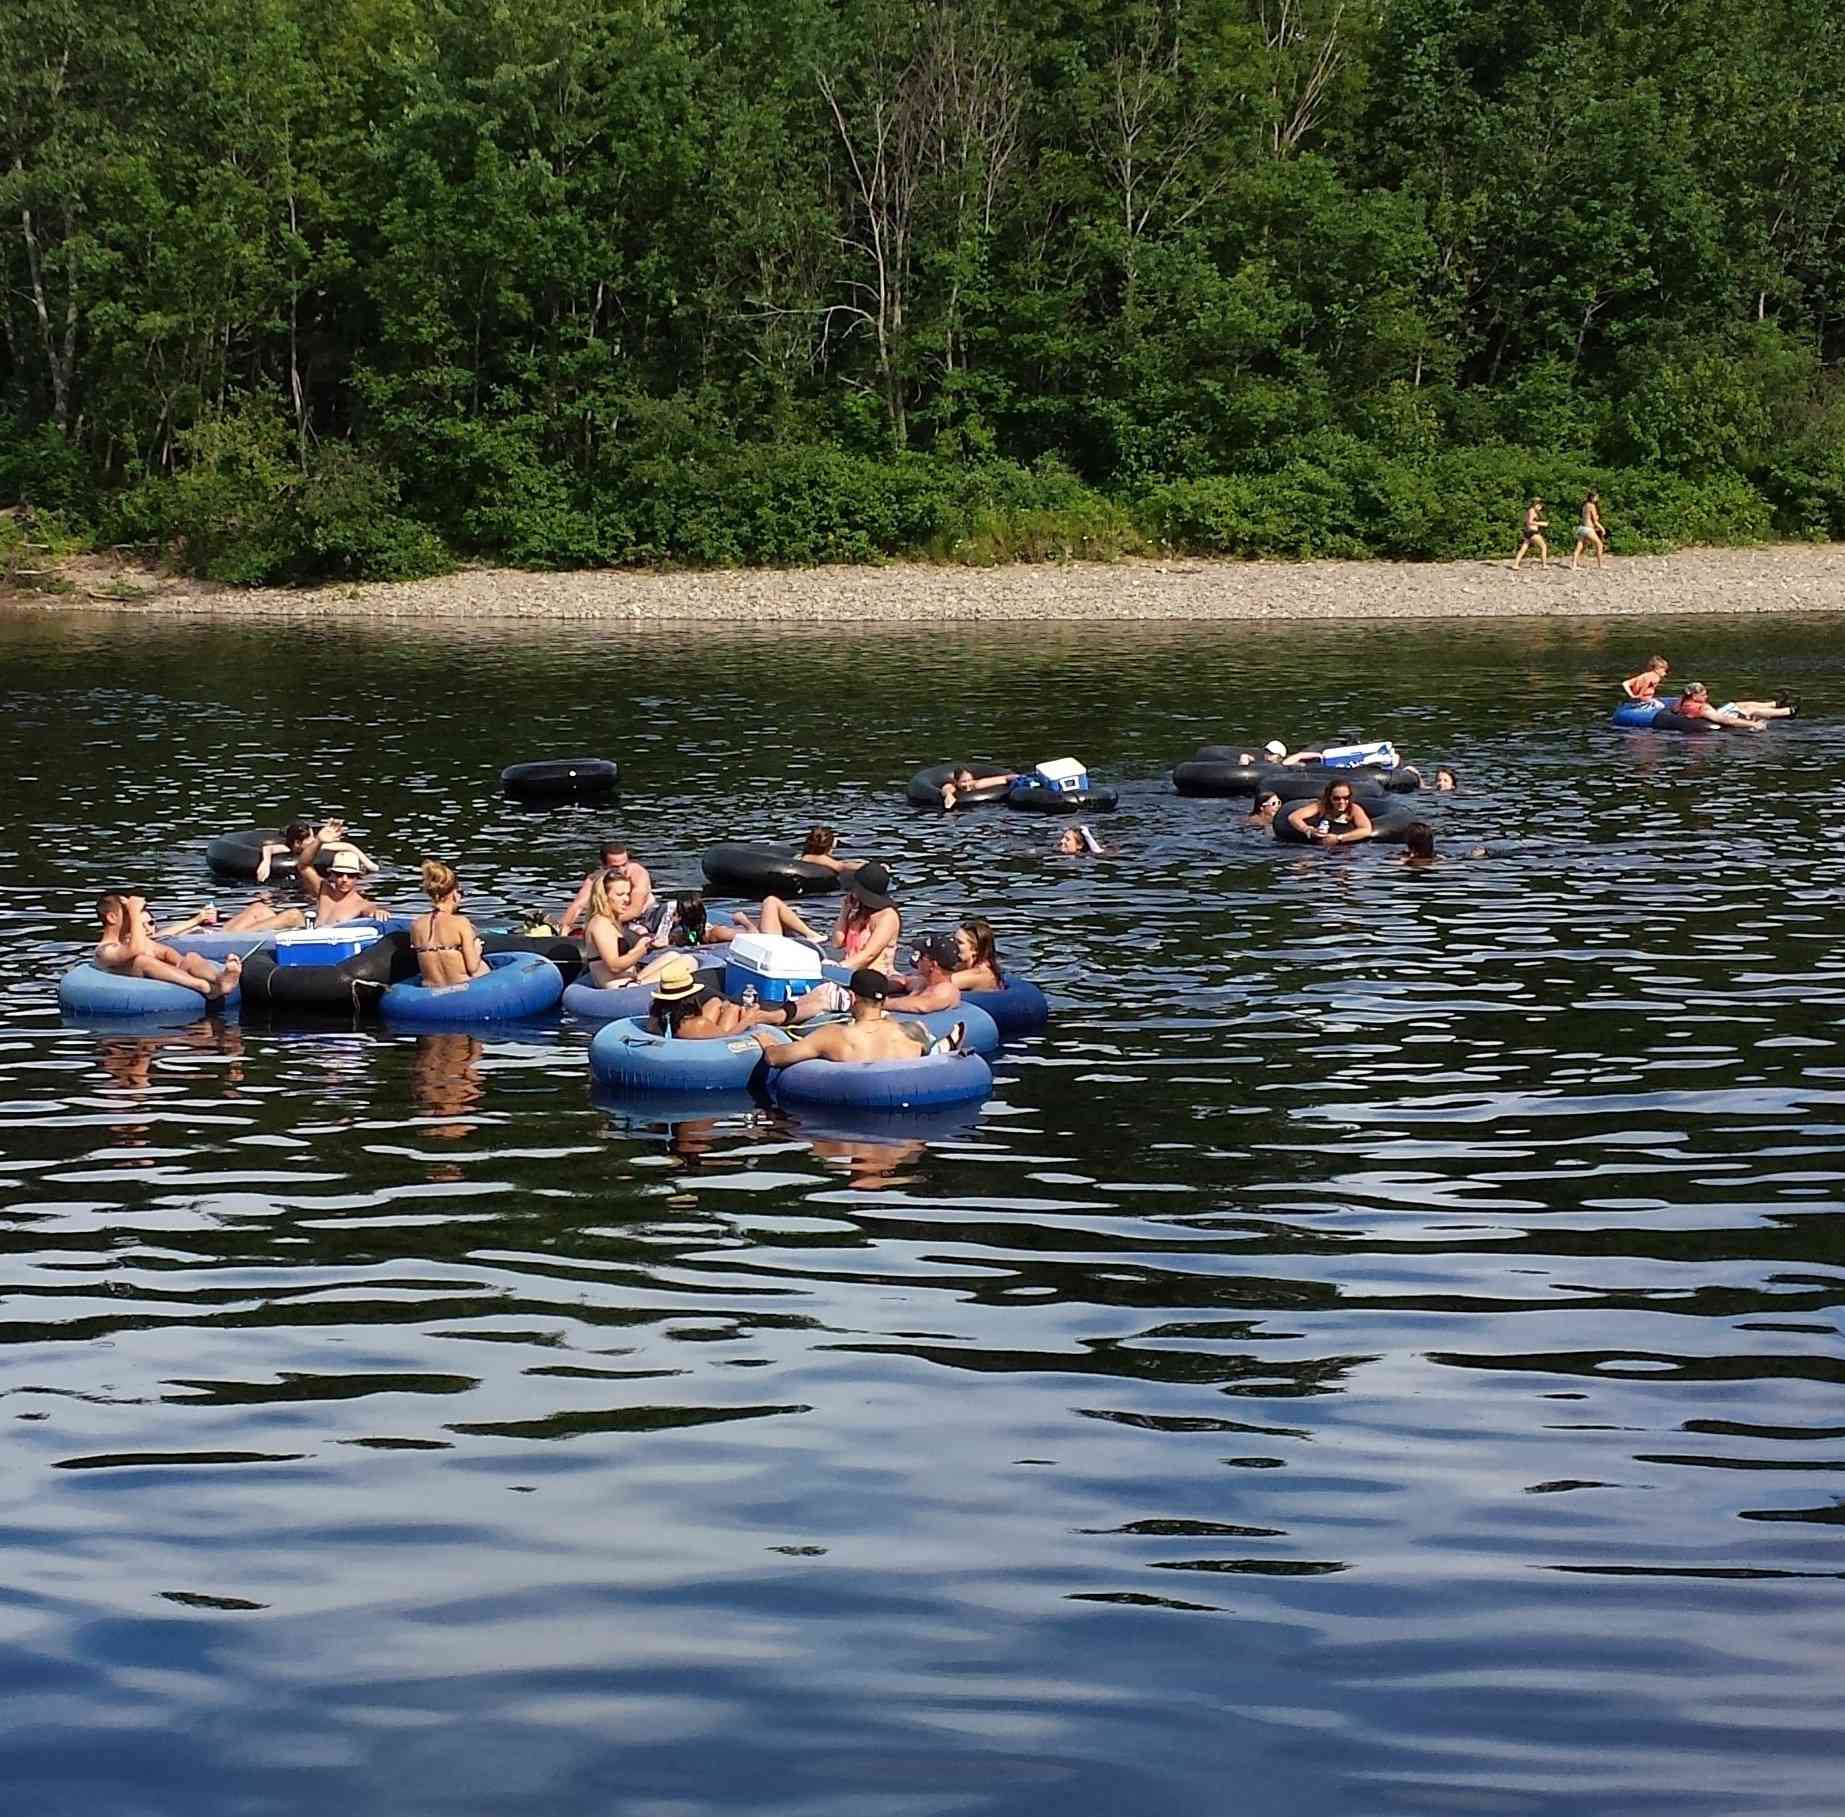 River Tubing Tips to Know Before You Go